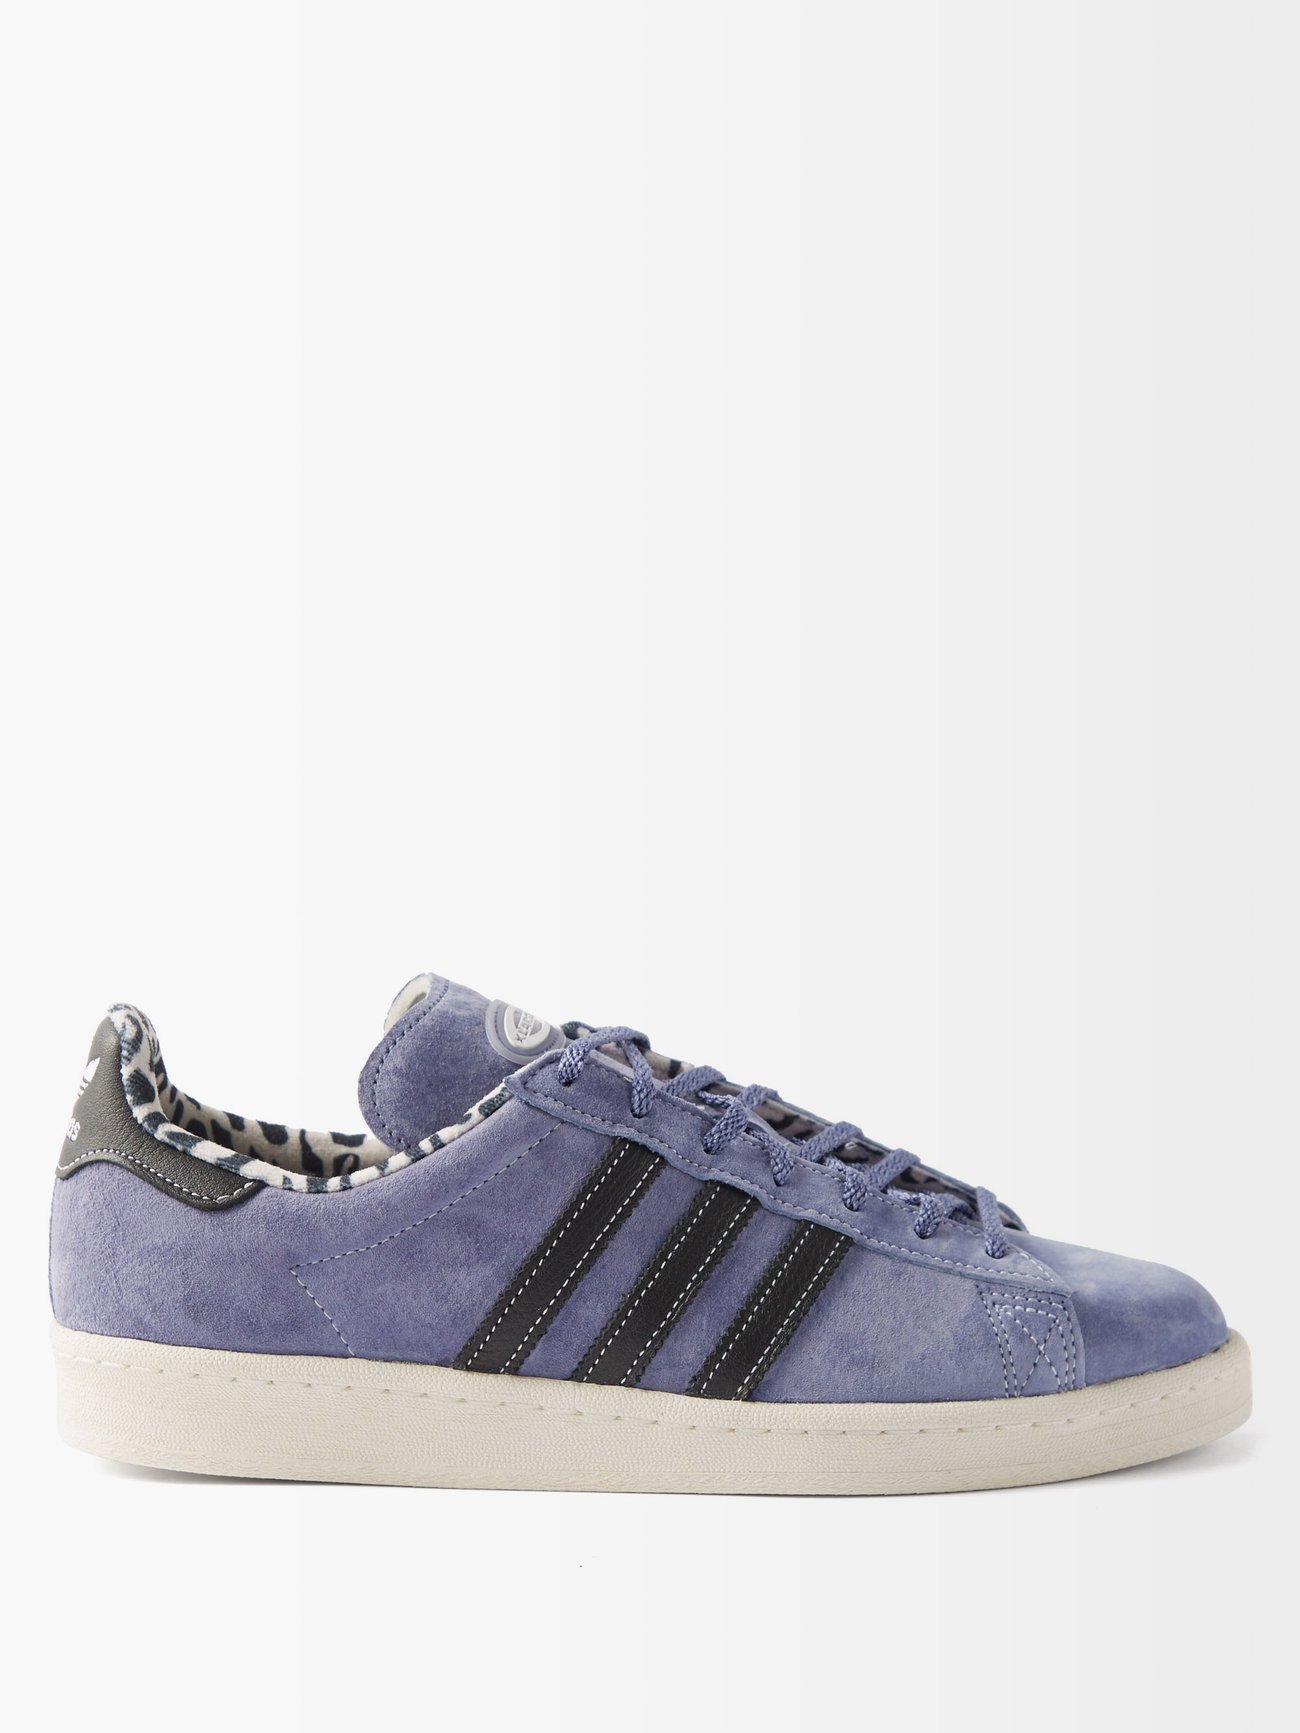 undefined | ADIDAS X XLarge Campus 80 suede trainers